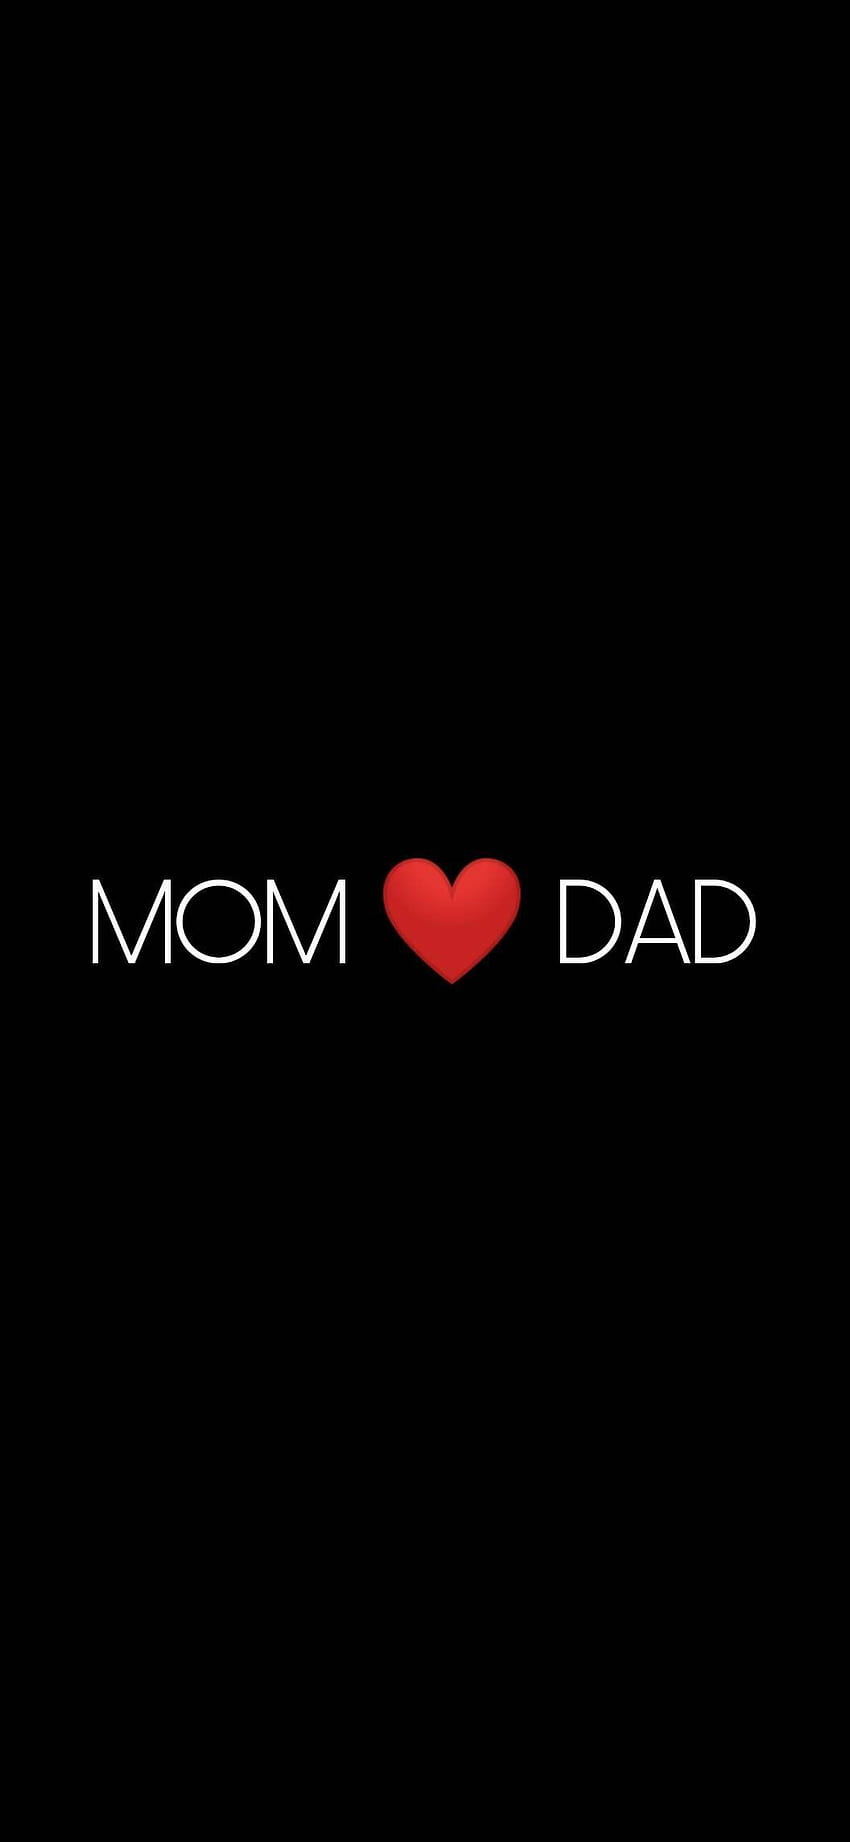 Mom and Dad, mother and father HD phone wallpaper